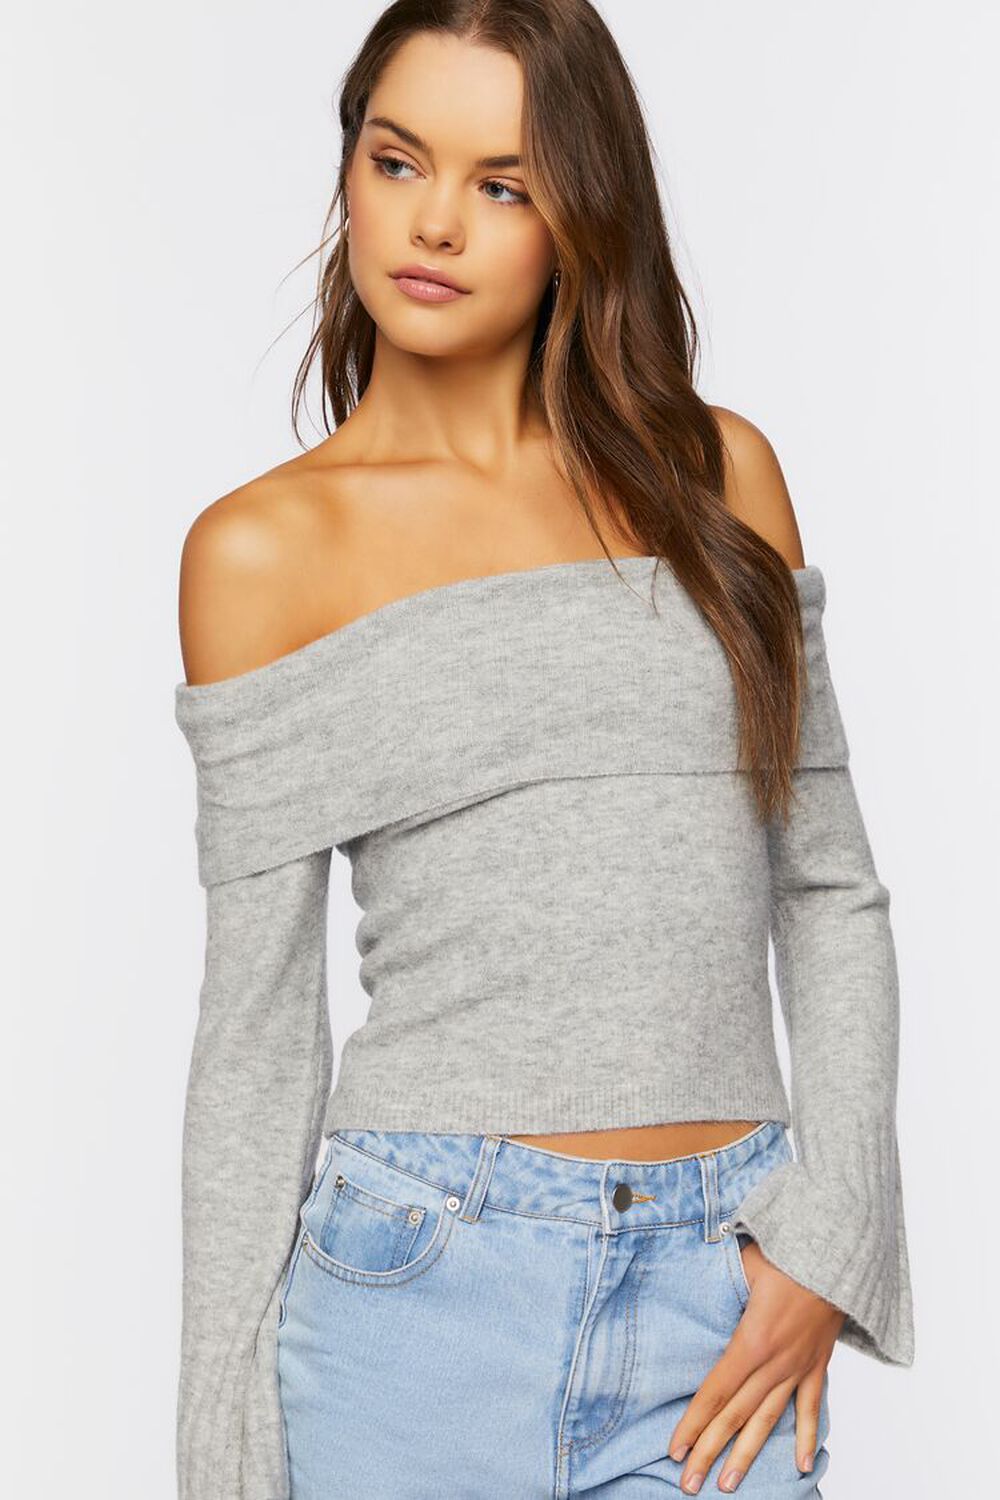 HEATHER GREY Off-the-Shoulder Cropped Sweater, image 1